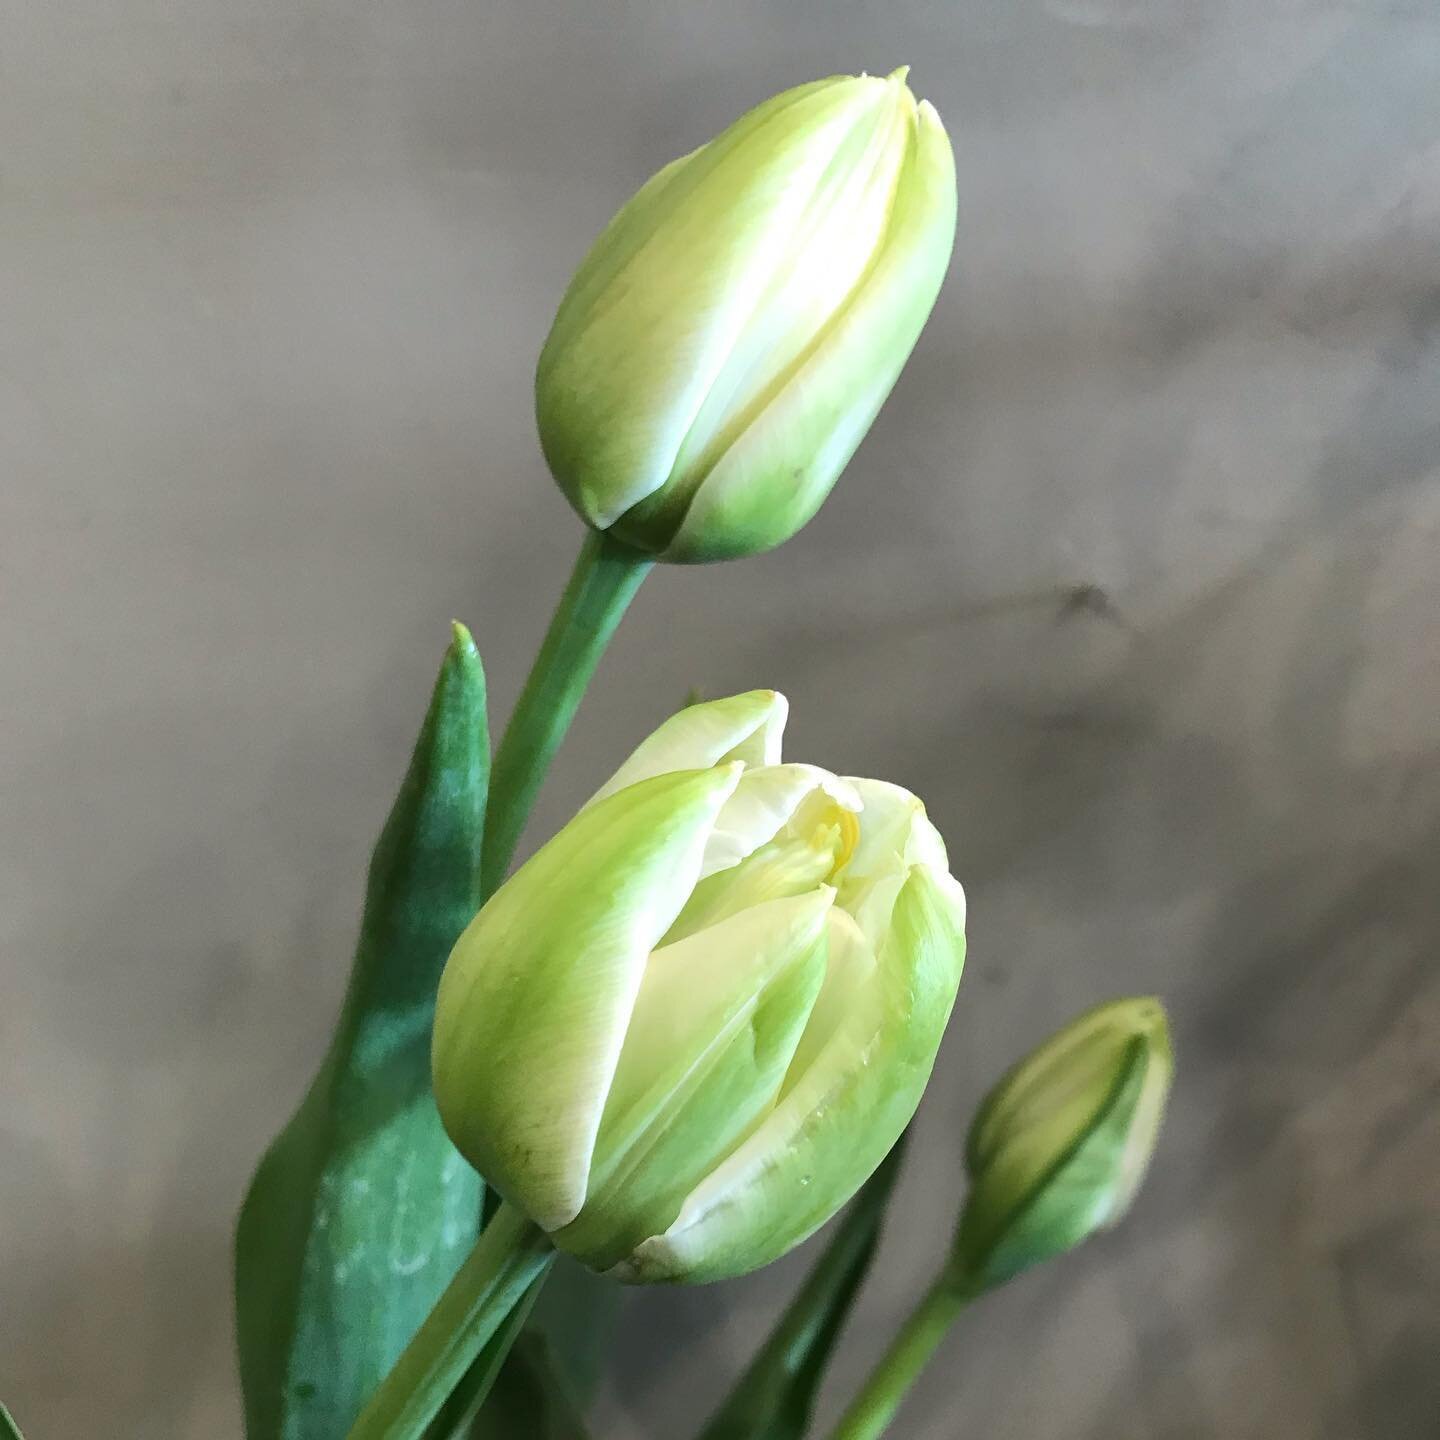 French tulips&hellip; simply divine. Much taller and turgid than your normal tulip.